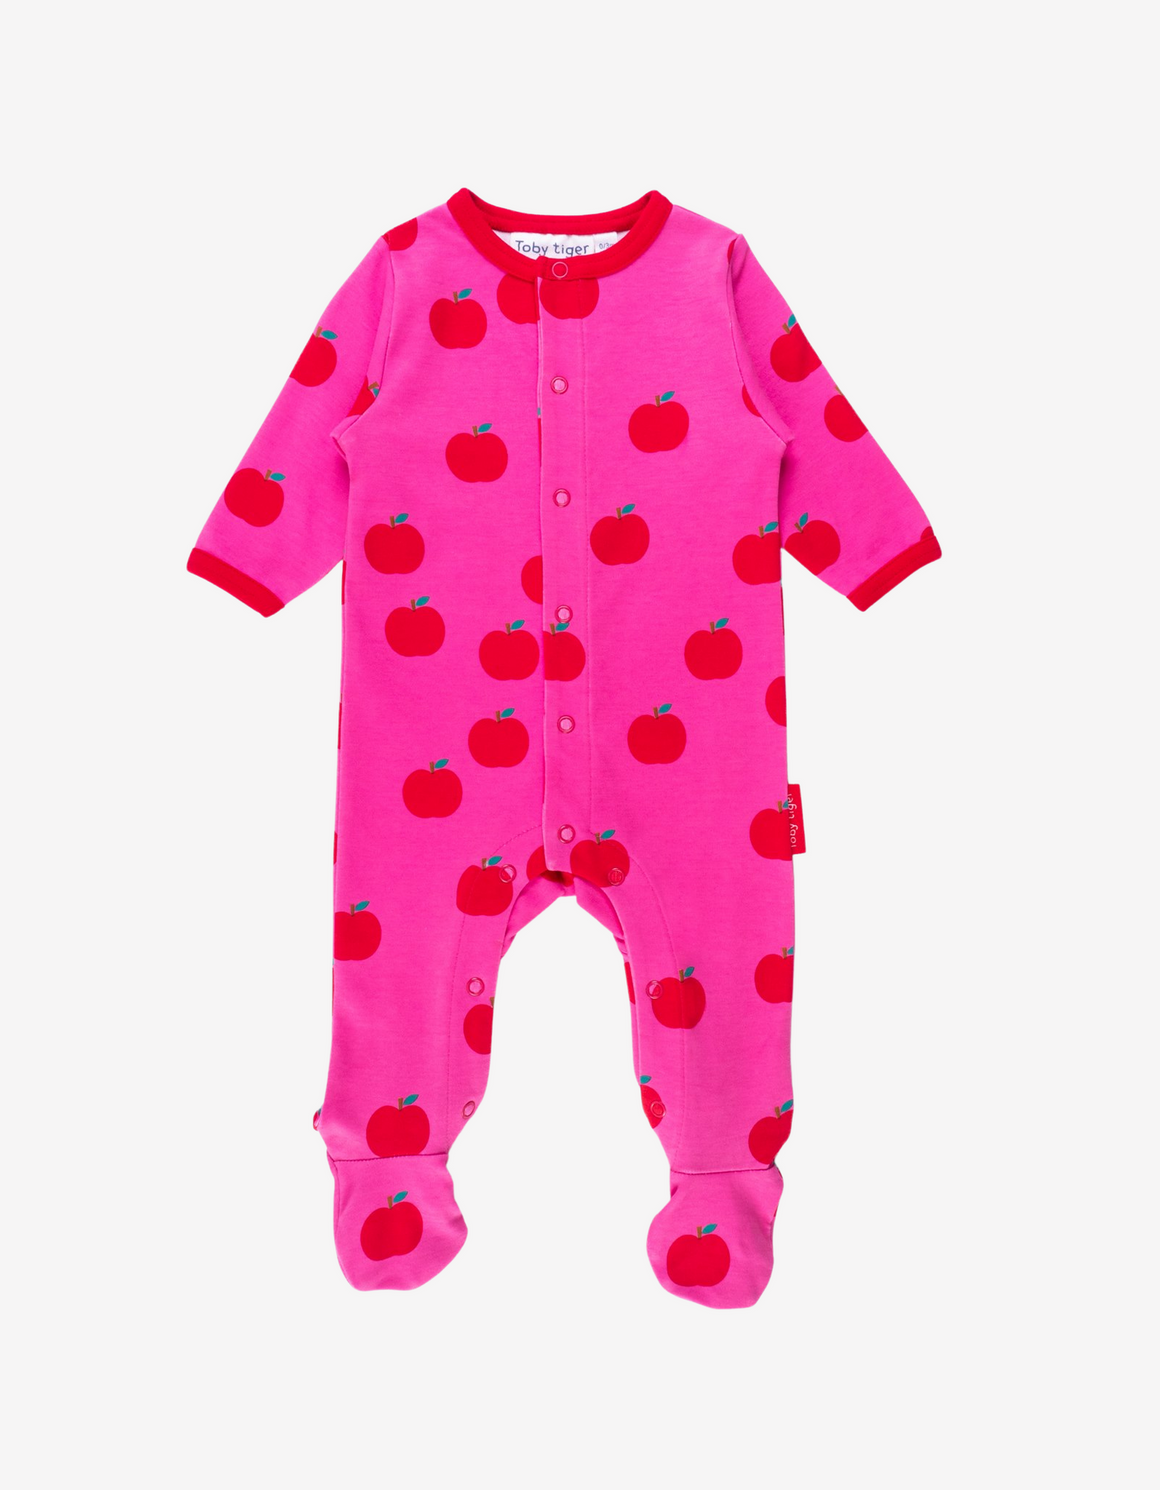 bright pink baby grow with a red apple print and red neckline and sleeves